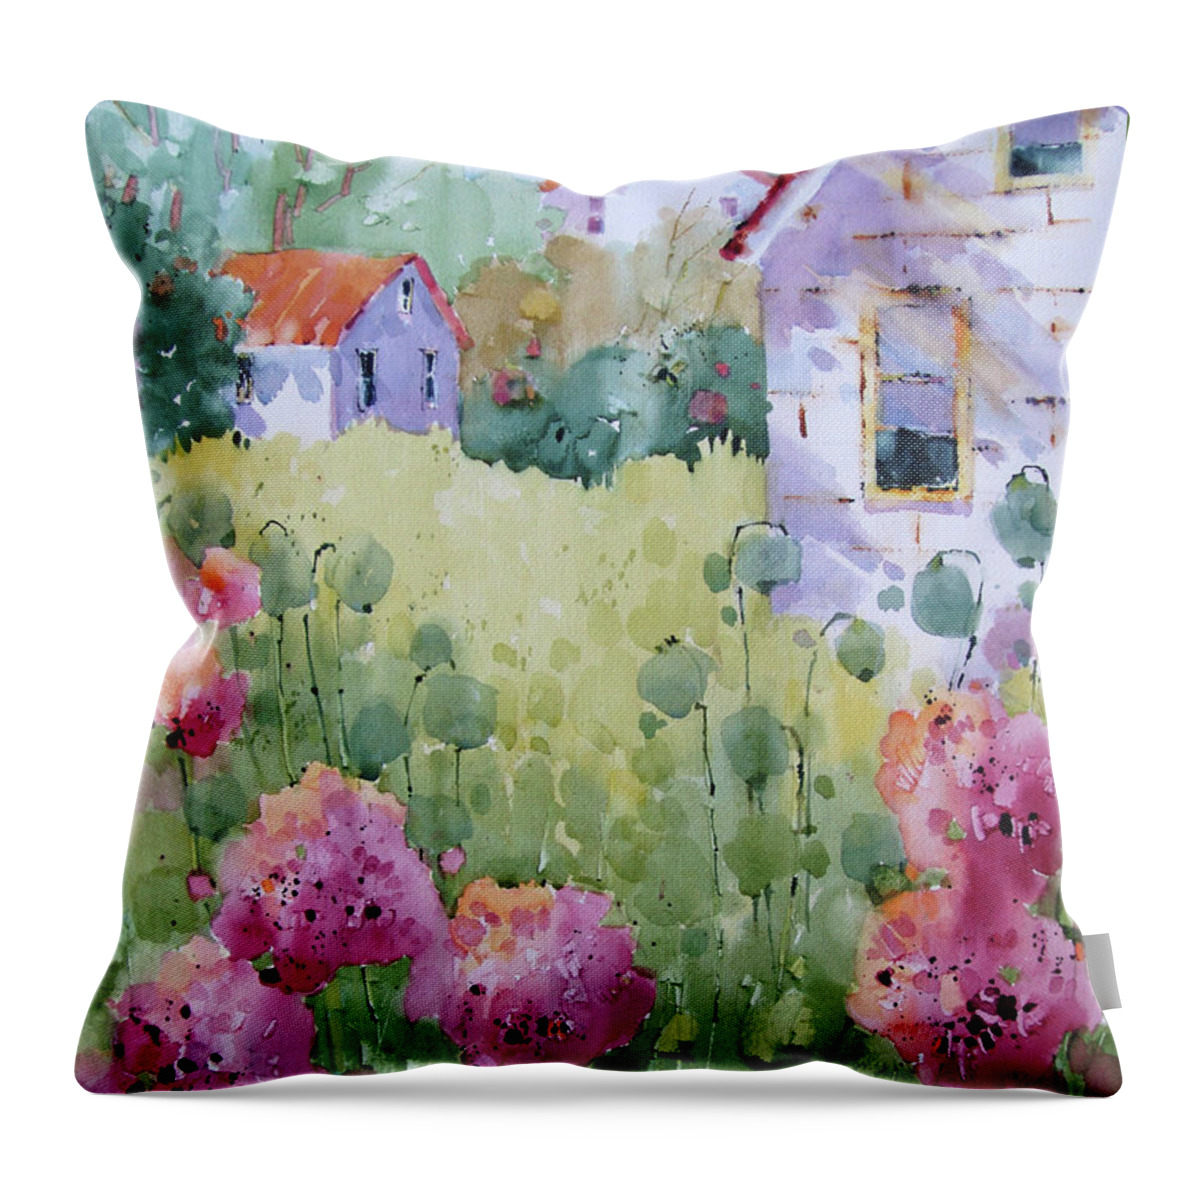 Cottages Throw Pillow featuring the painting Flower Lady's Poppies by Joyce Hicks